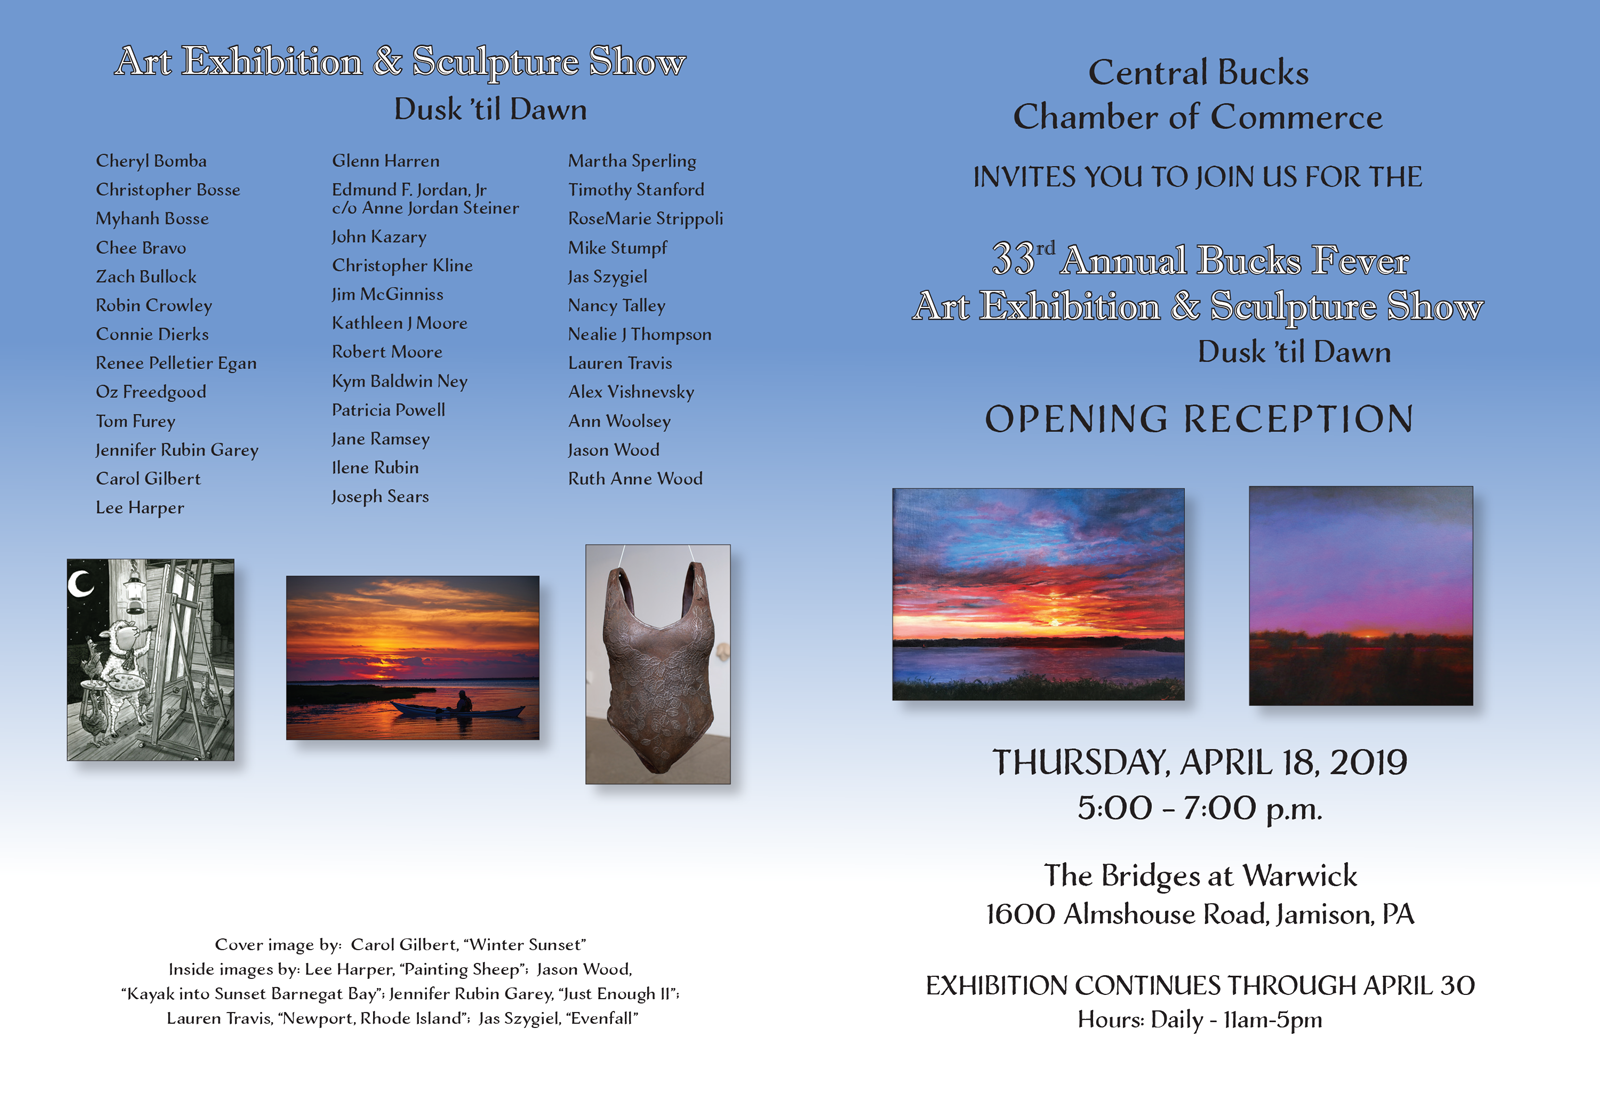 Central Bucks Chamber of Commerce 33rd Annual Bucks Fever Art Exhibition Opening Reception Thursday, April 18, 2019 at The Bridges at Warwick, 1600 Almshouse Road, Jamison, PA 18976. Visit the Central Bucks Chamber of Commerce website for more information.